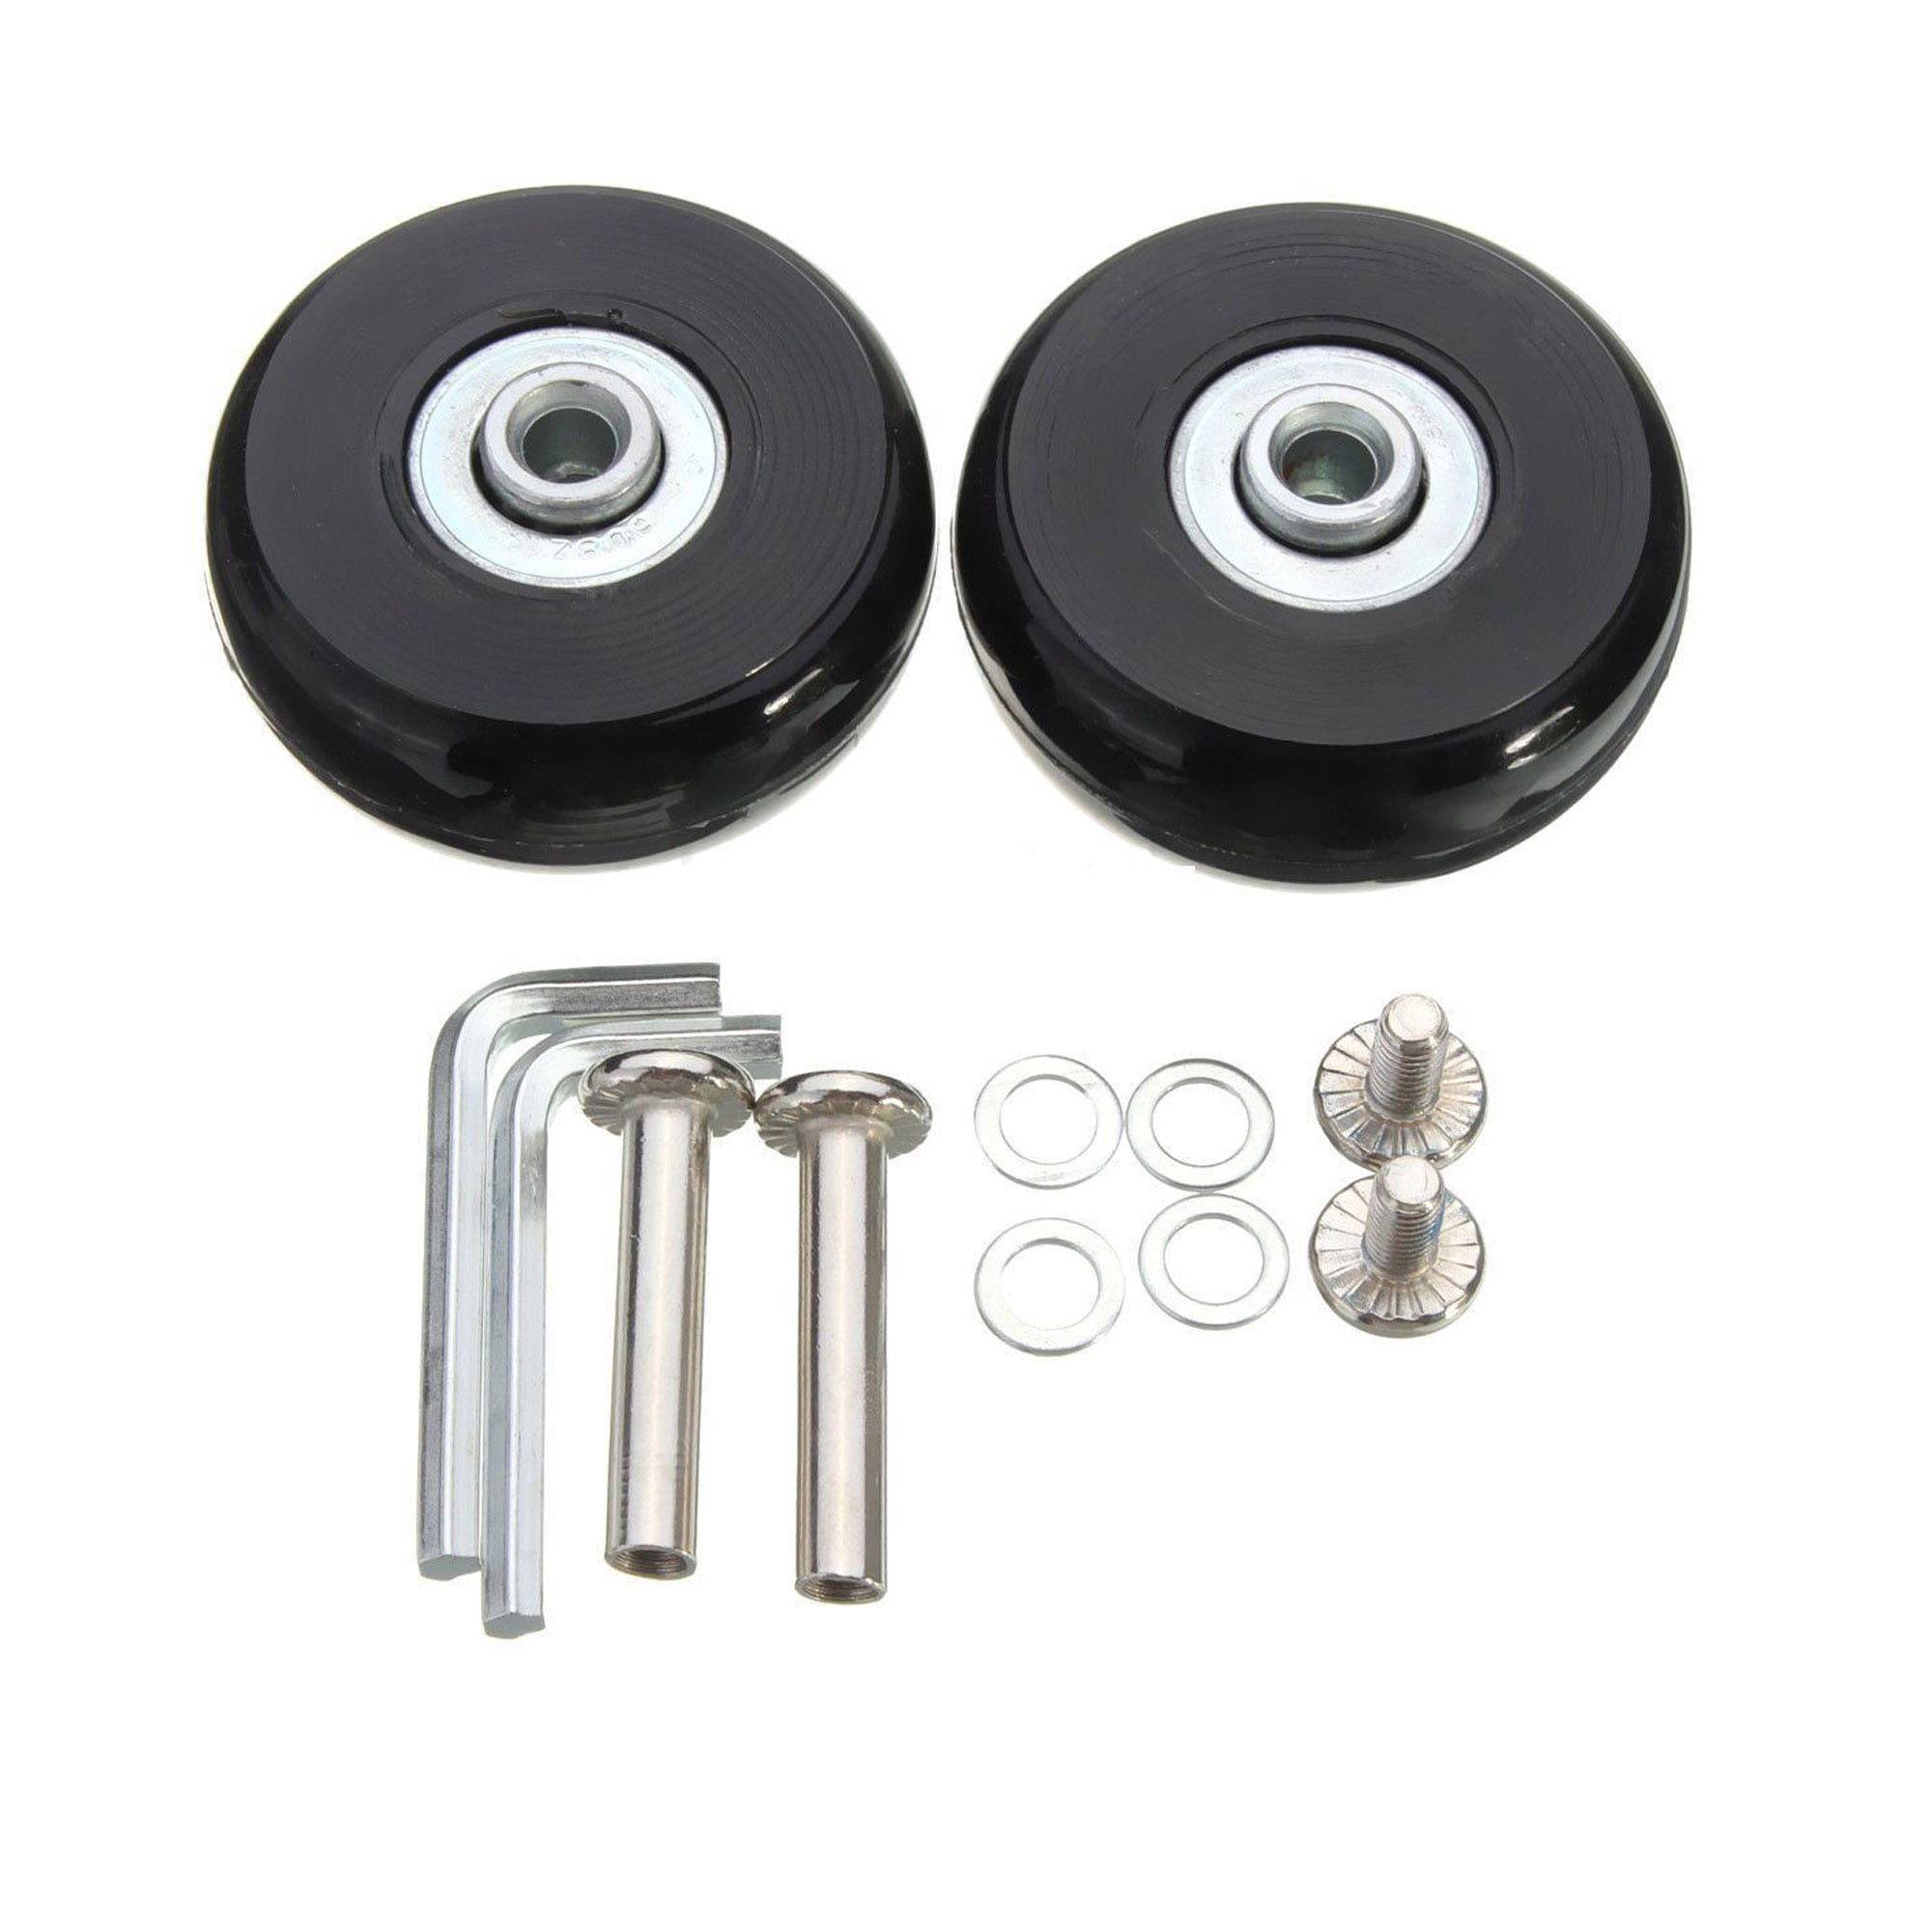 2Pcs/ 4pcs Luggage Replacement Wheels Axles Rubber Deluxe Repair OD 50mm Metal 